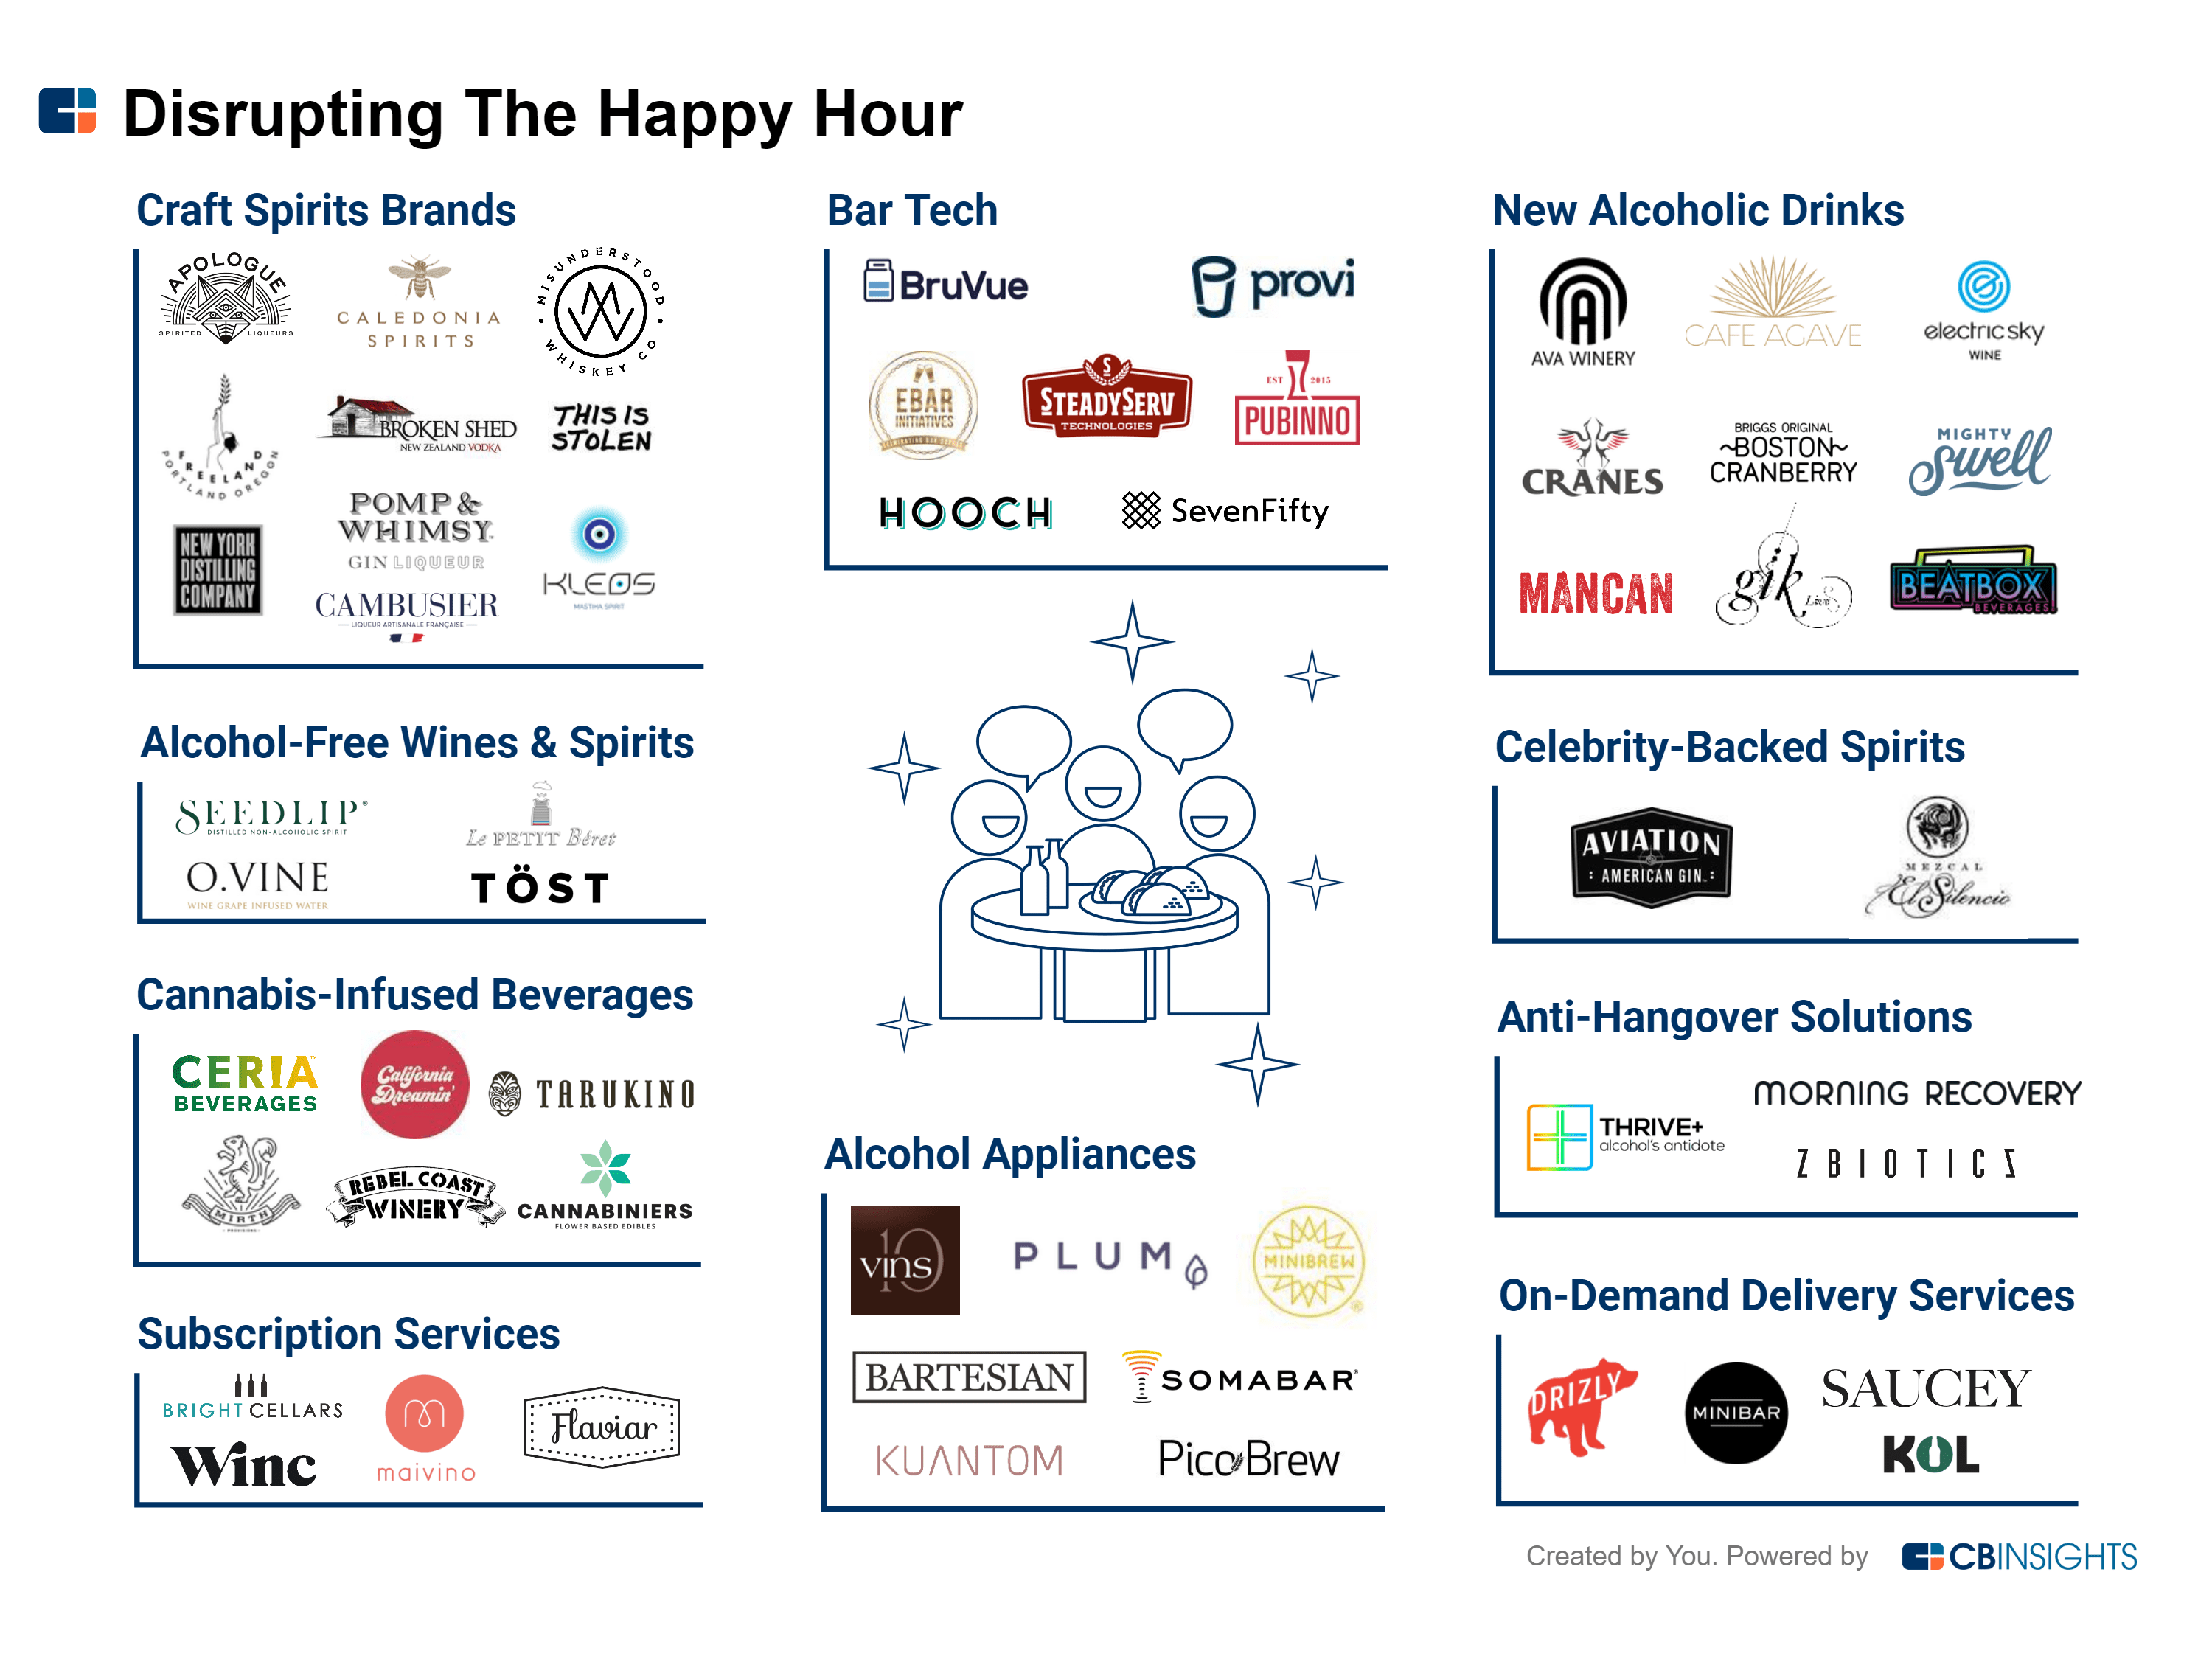 Disrupting the Happy Hour